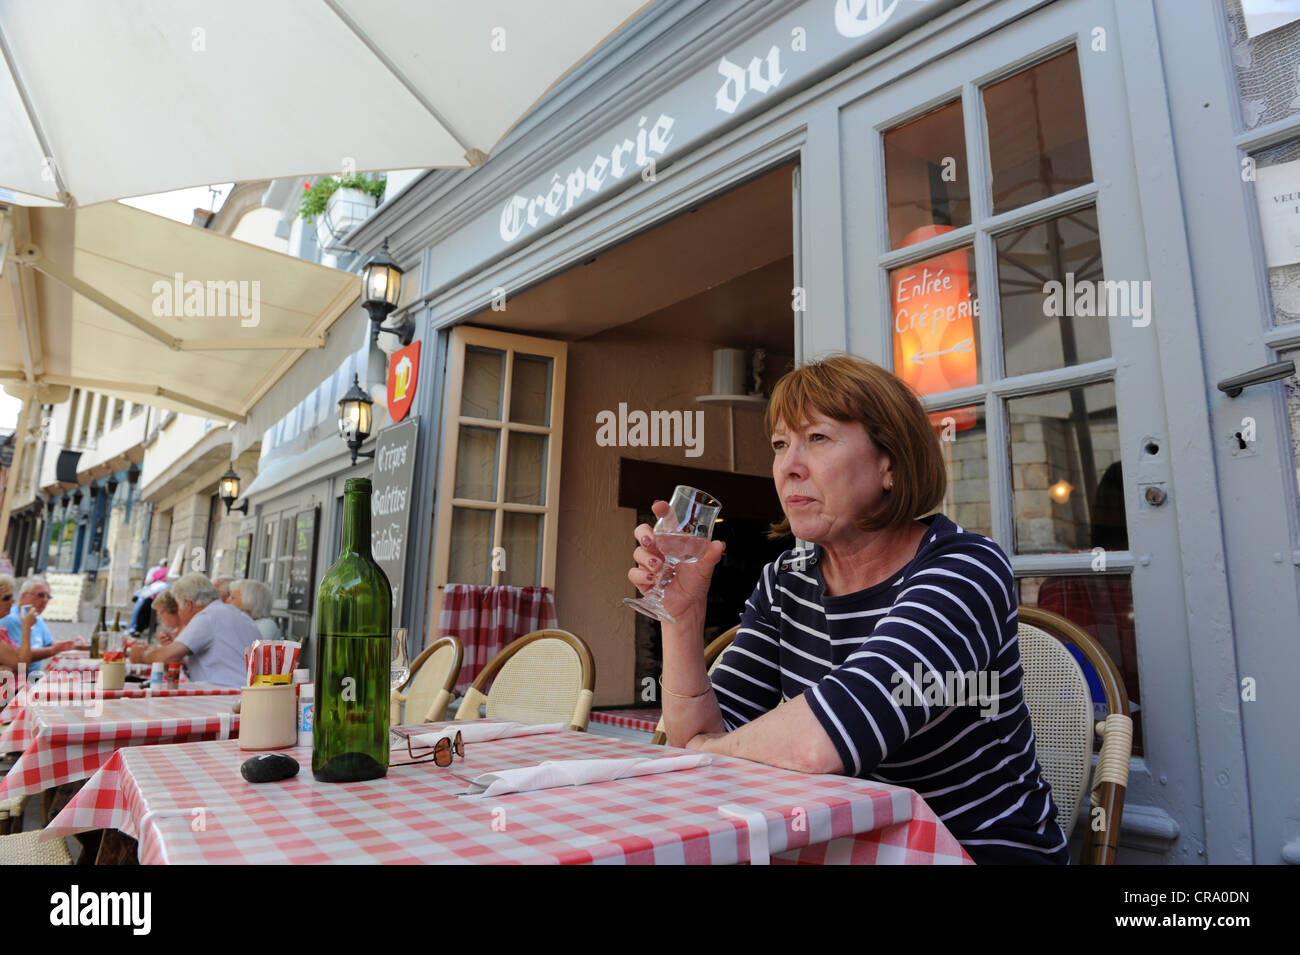 Woman drinking wine at a french cafe in Josselin, Brittany, France Stock Photo